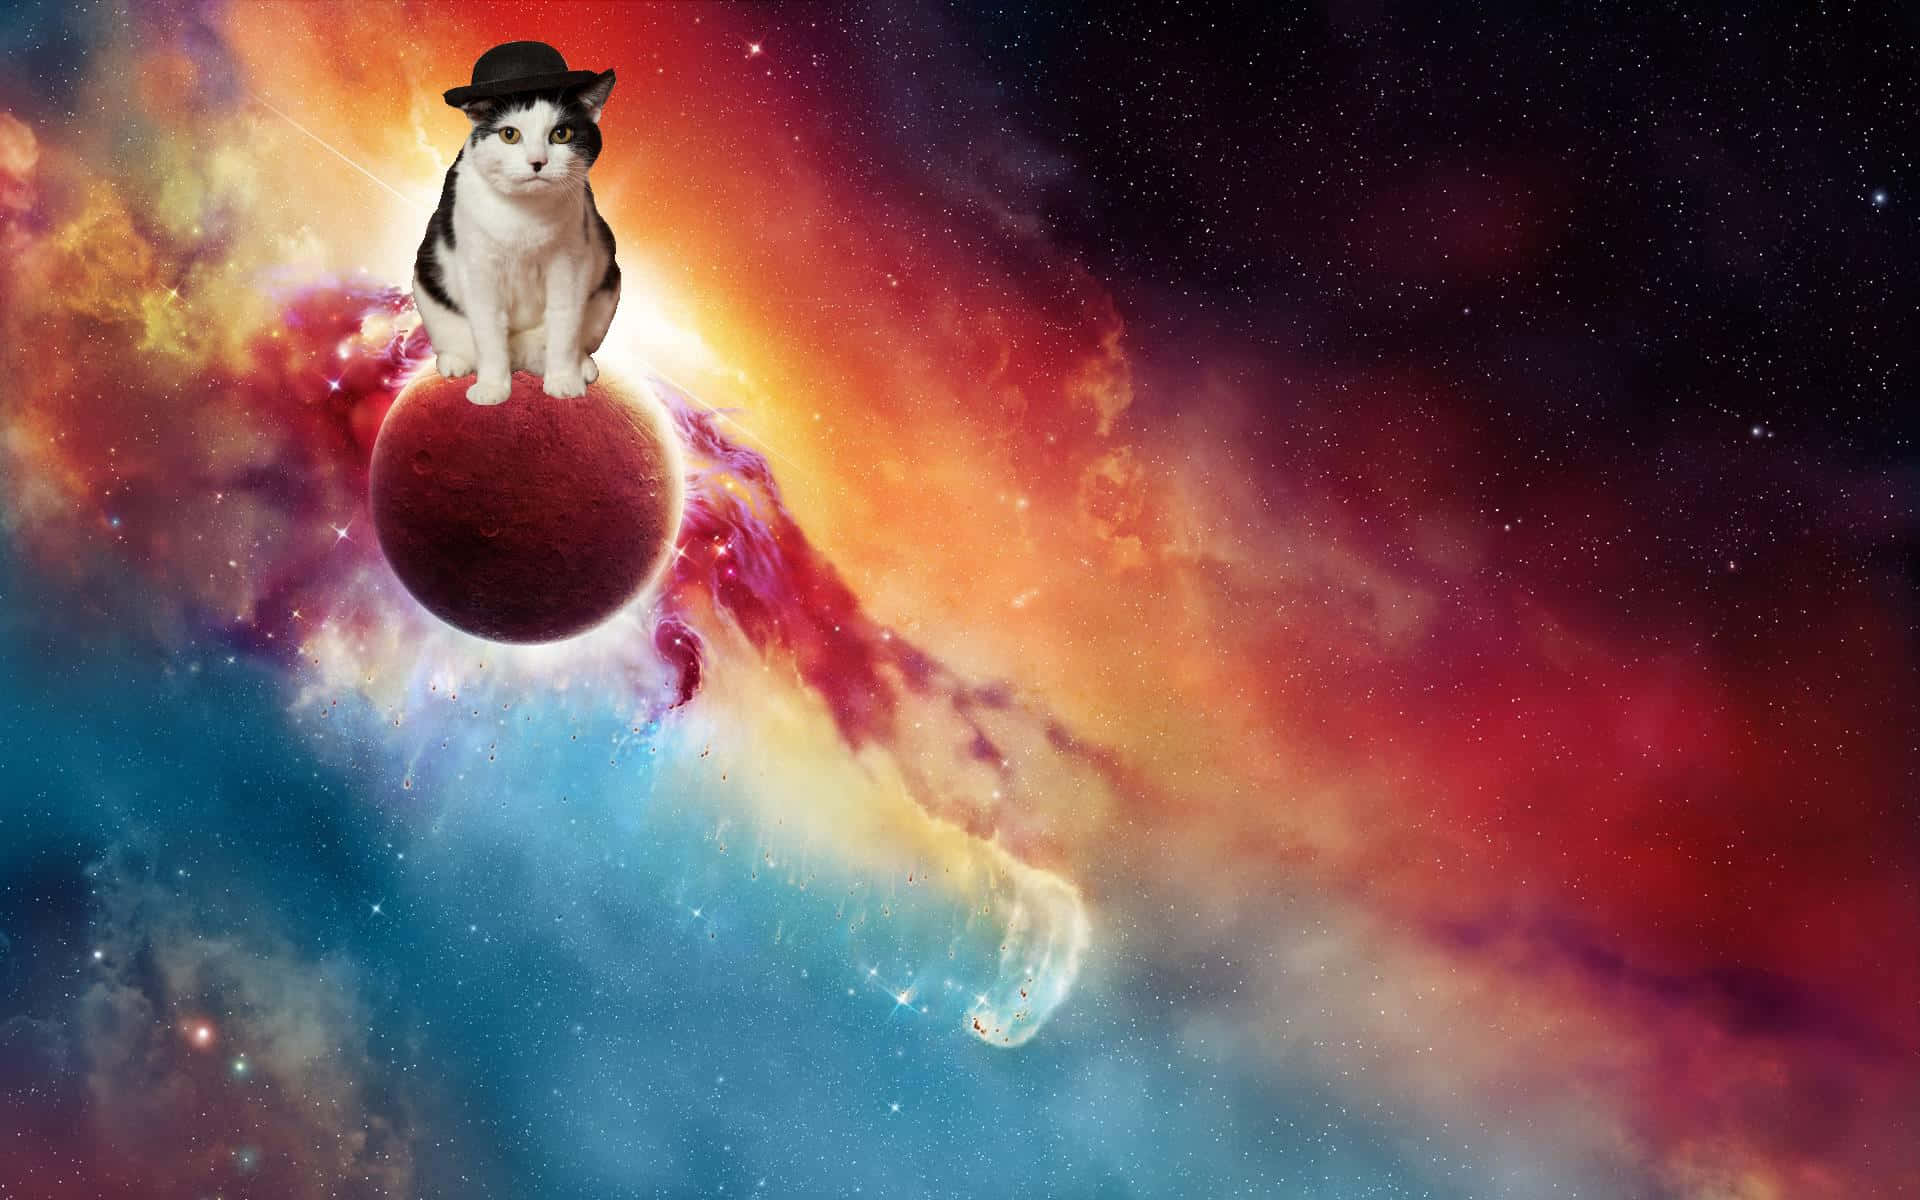 "Exploring a brave new world, cats in space make a daring journey." Wallpaper